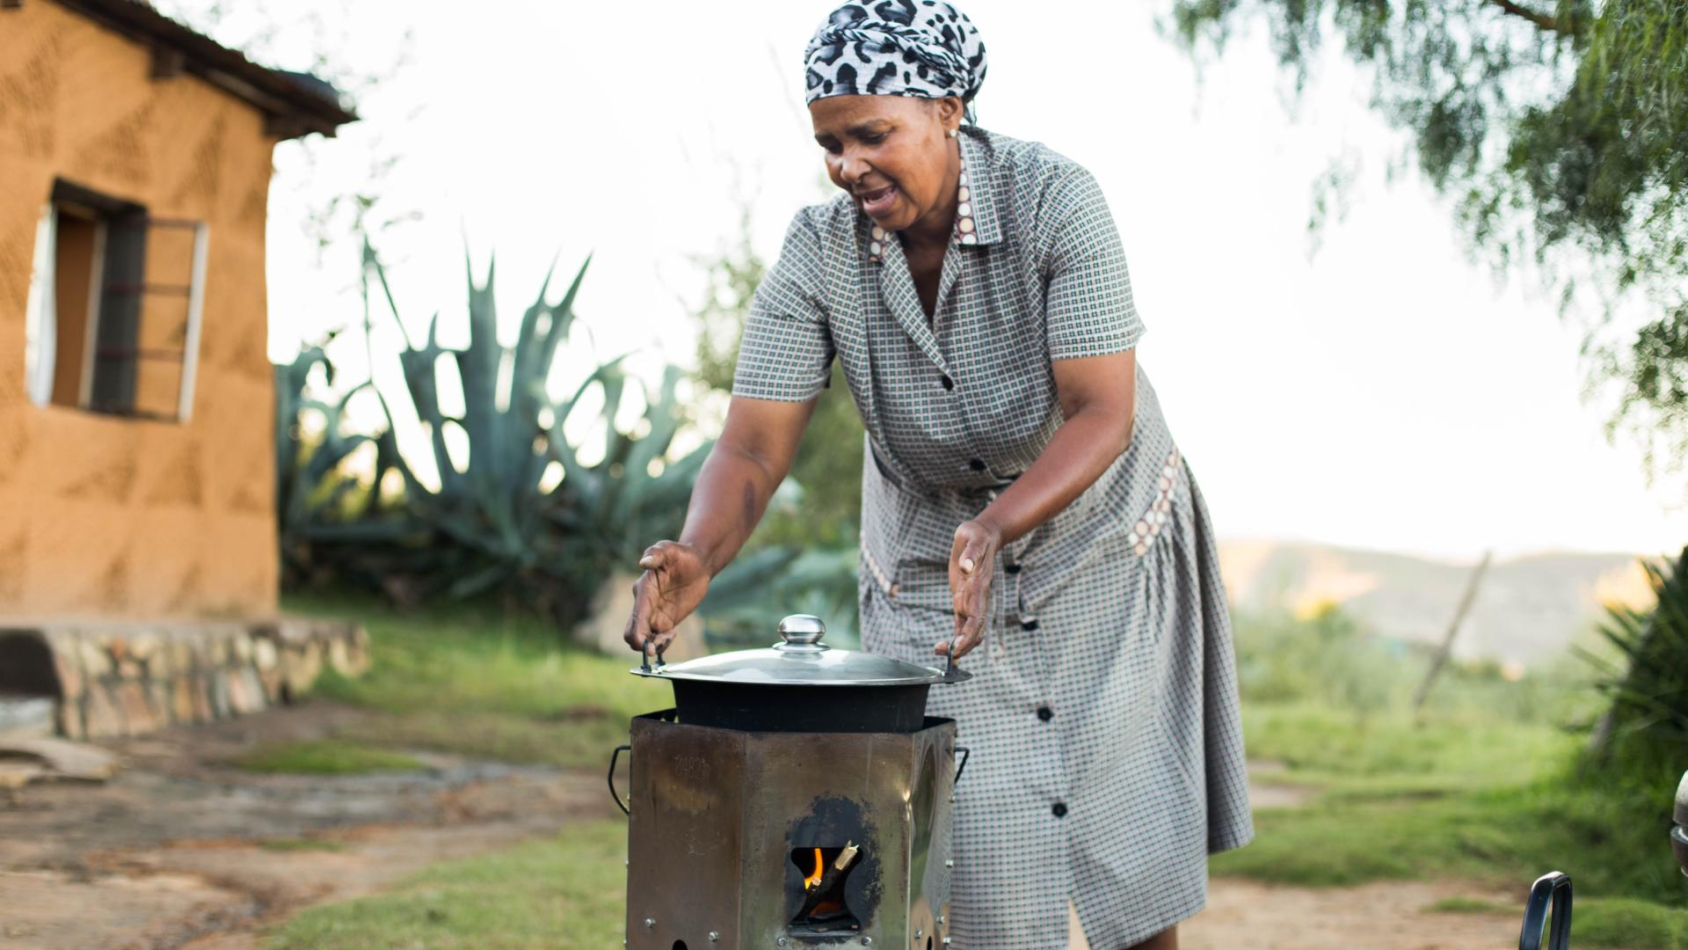 A woman cooks on a traditional stove